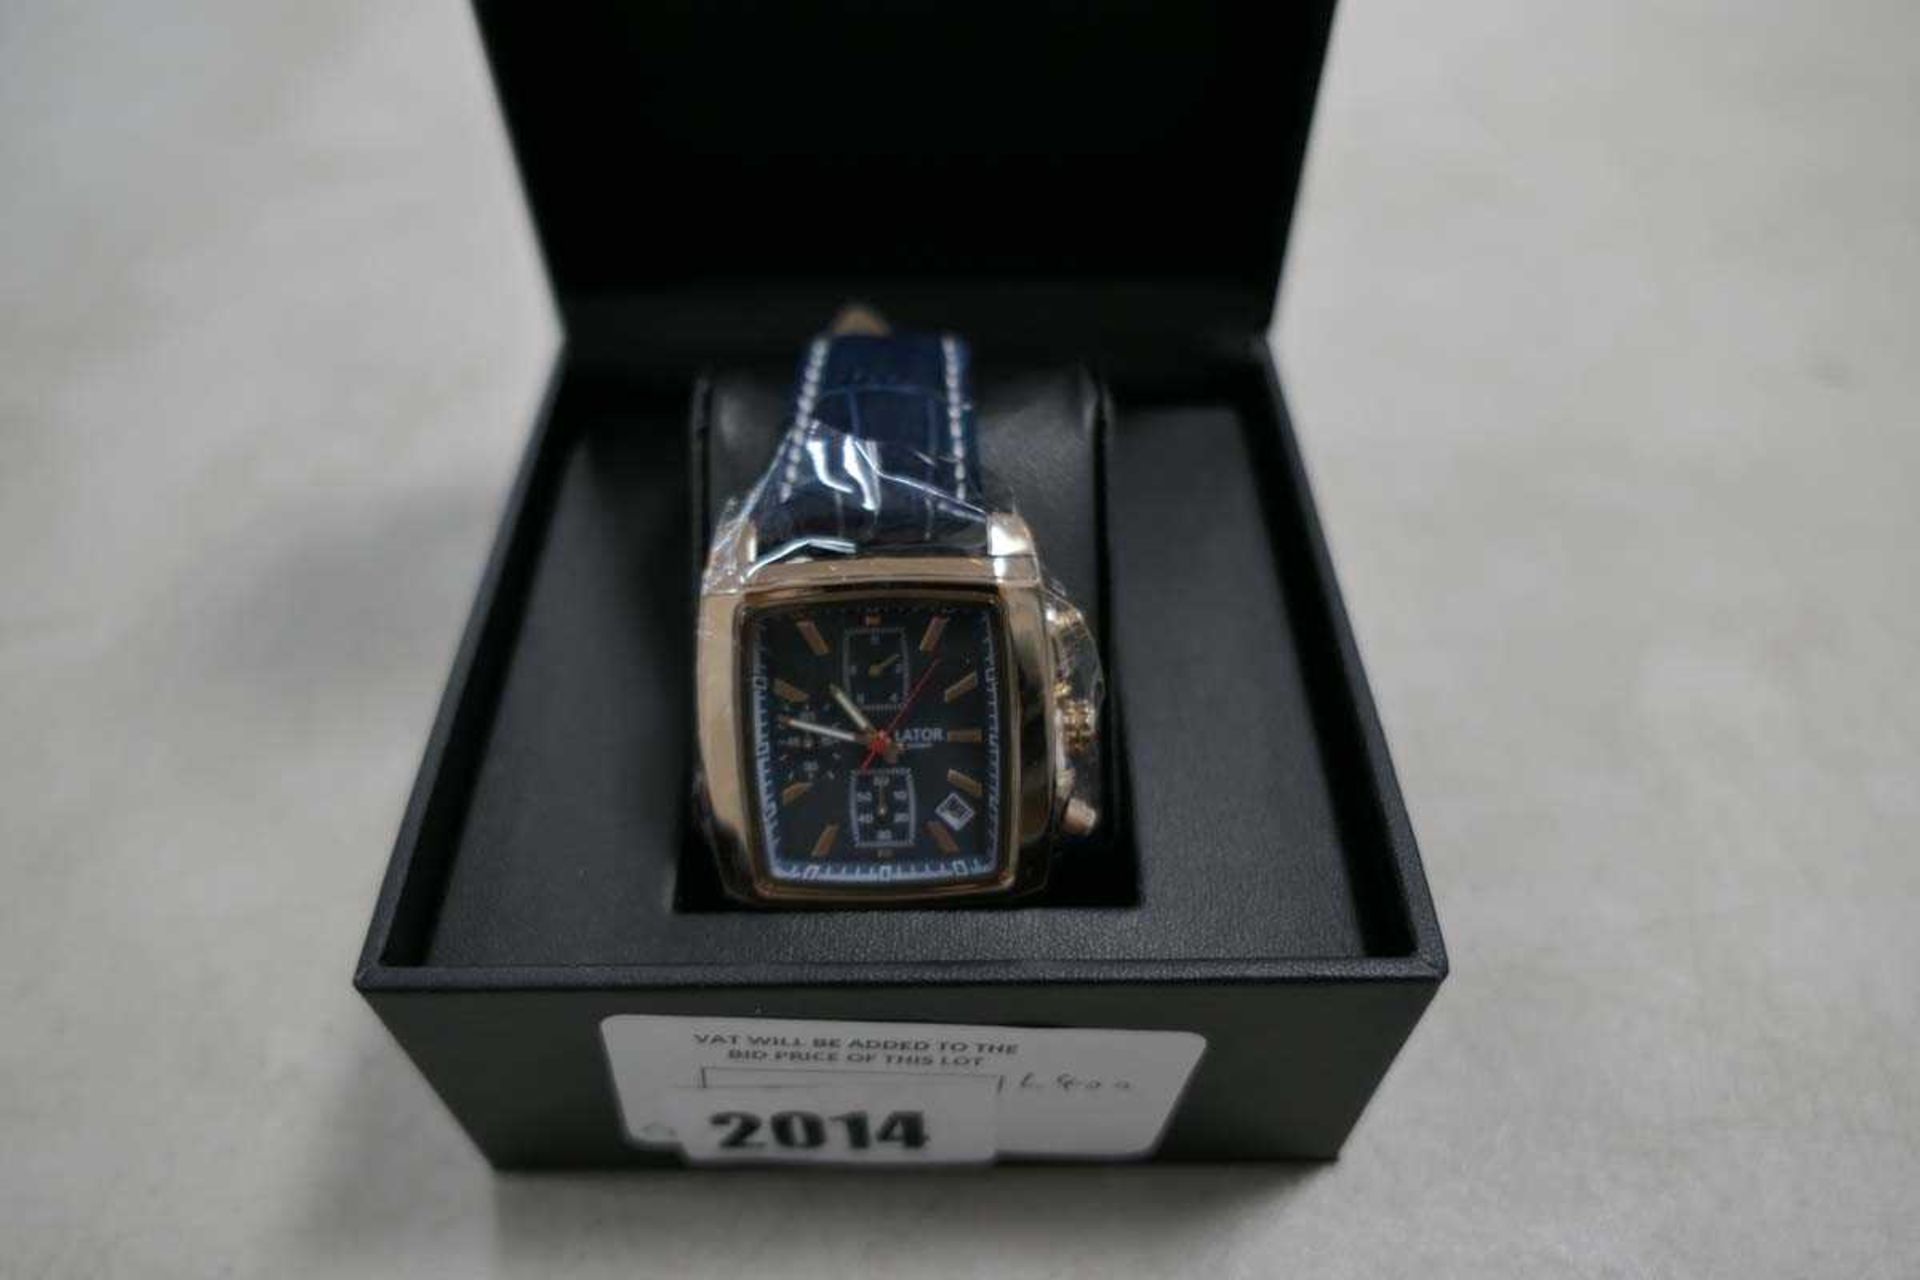 +VAT Lator Calibre L400 watch with box - Image 2 of 2